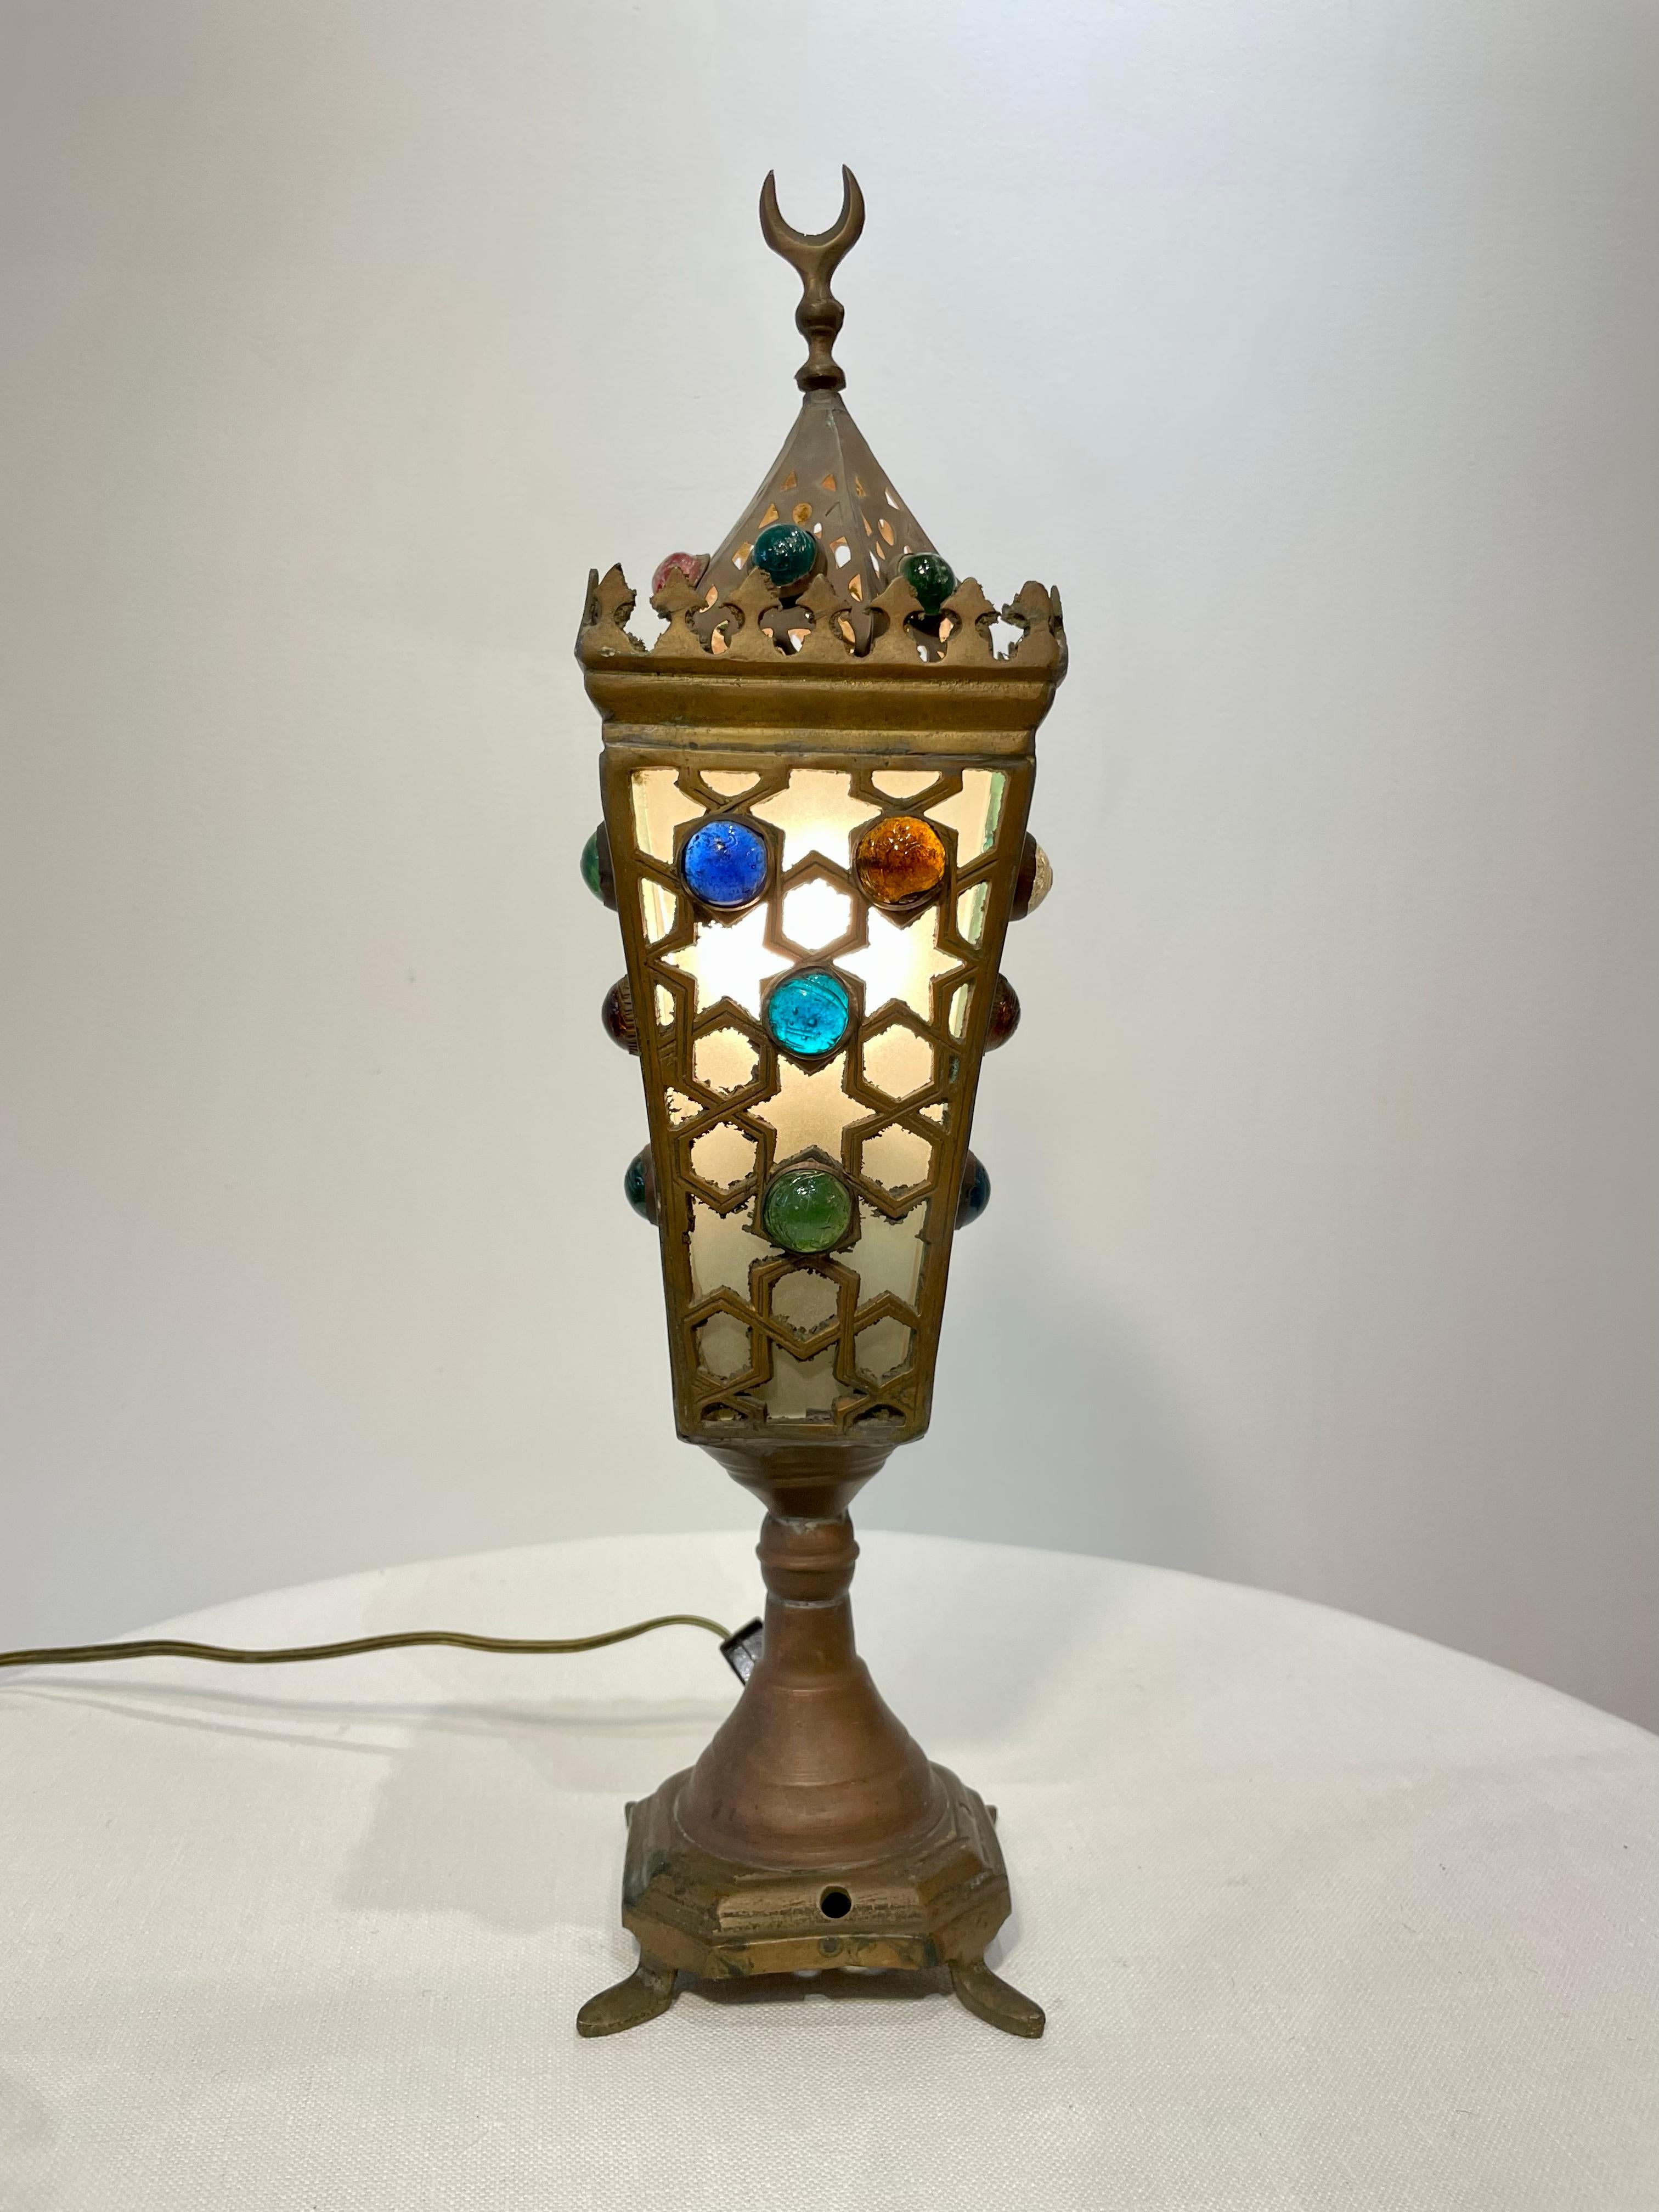 Brass and opaque glass Moorish style small table lamp with covered glass cabochon details. A pierced fret work design covers the glass on all four sides creating a Morrocan pattern in shadow to emanate from the lamp when lit.